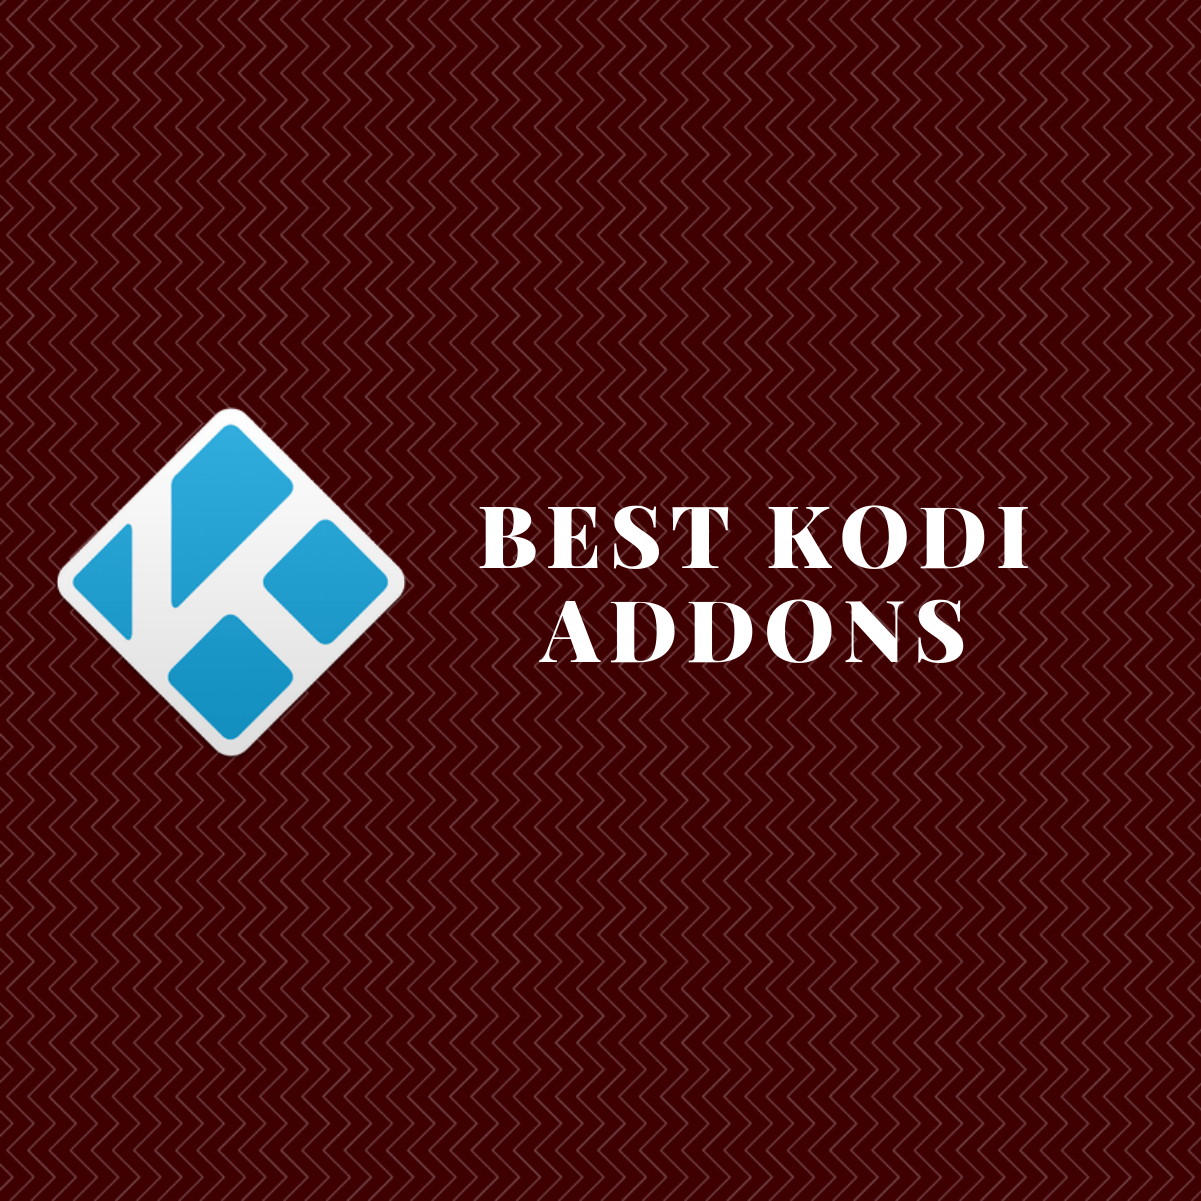 70+ Best Kodi Addons for 2022 That Really Works | Movies, Live TV